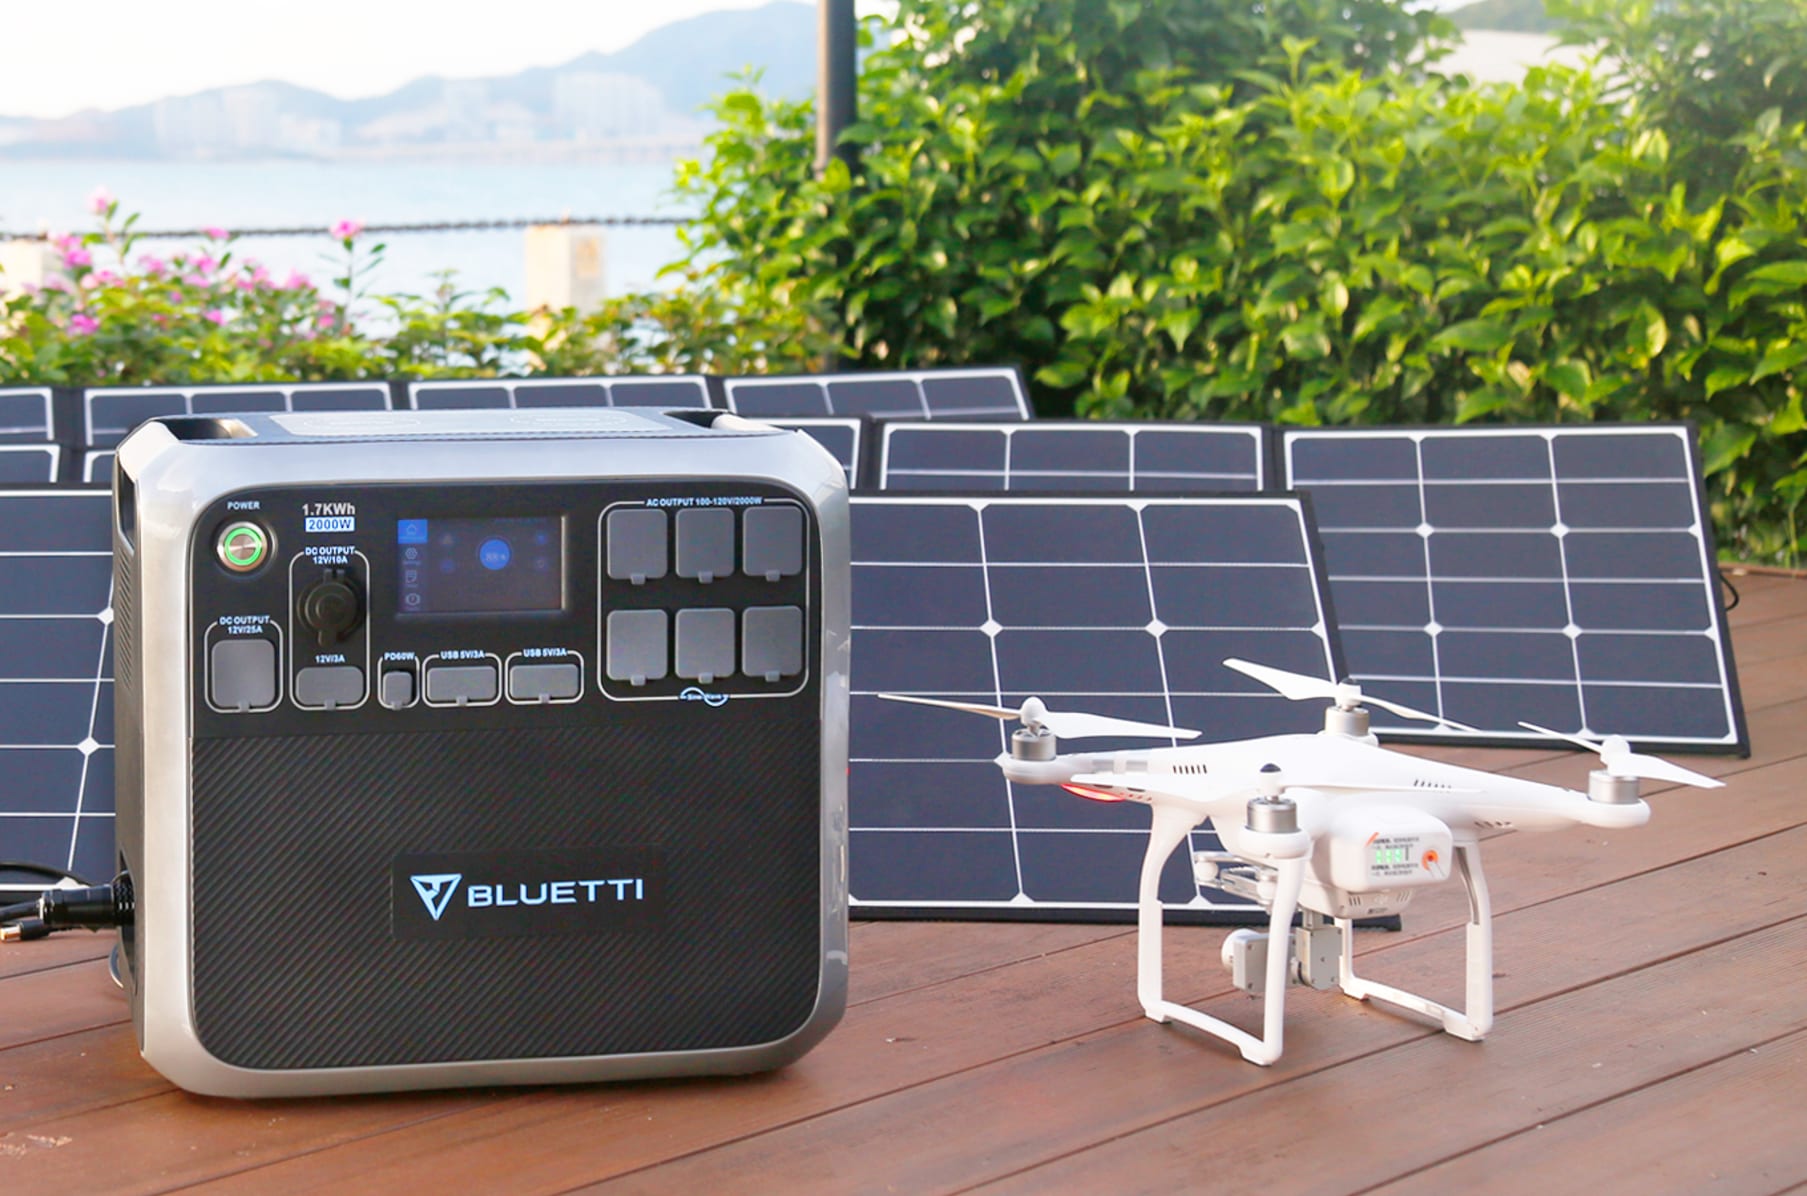 Bluetti AC200P 2000Wh/2000W Portable Power Station review - all the power you need! - The Gadgeteer